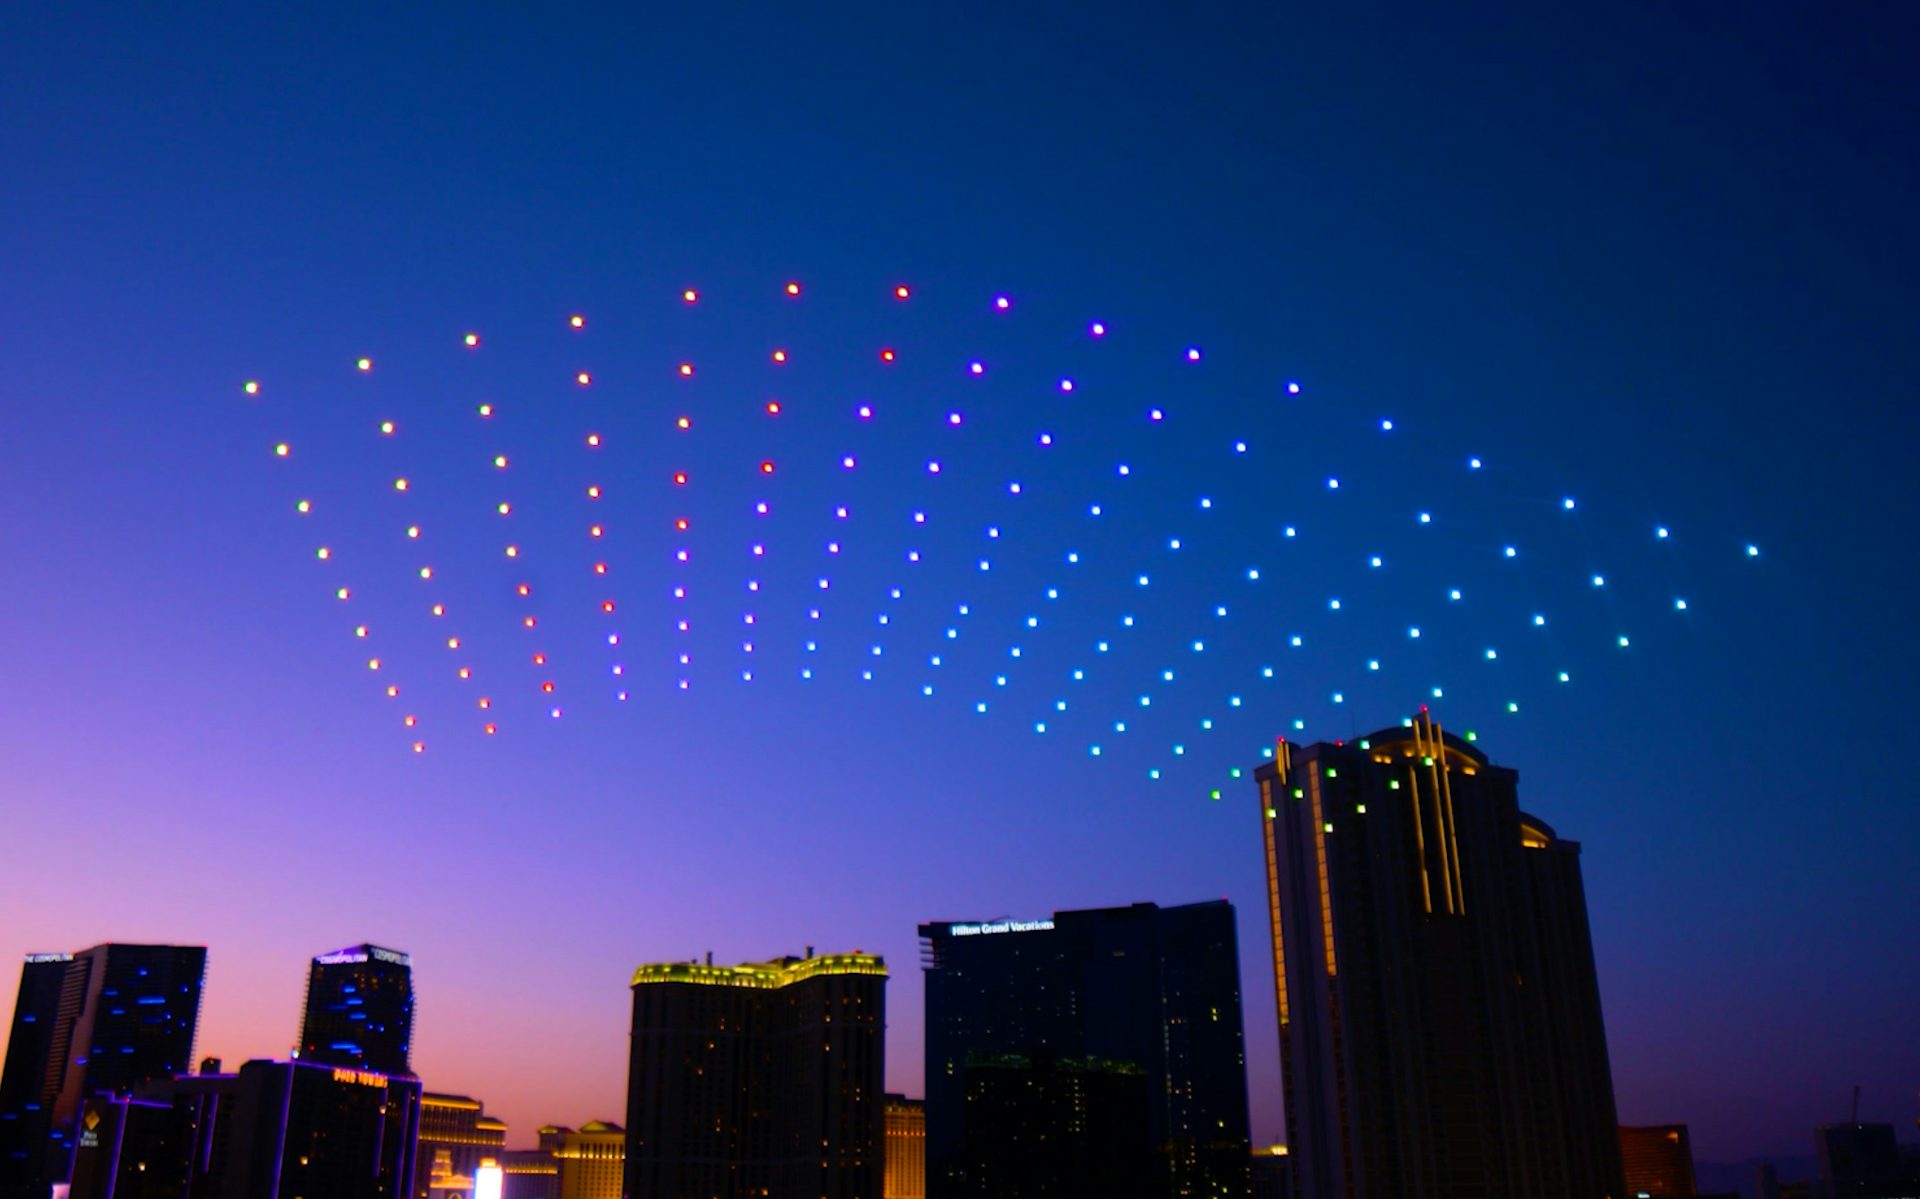 The Verge Aero drone team pulled off the seemingly impossible at this year’s Experiential Marketing Summit (EMS) at the MGM Grand Las Vegas – flying a drone show high above the ballroom right next to Harry Reid International Airport.Drone technology pioneers Verge Aero and Drone Stories joined forces in October to deliver an incredible, perfectly programmed show to mark the 25th anniversary of Electric Daisy Carnival in Las Vegas.